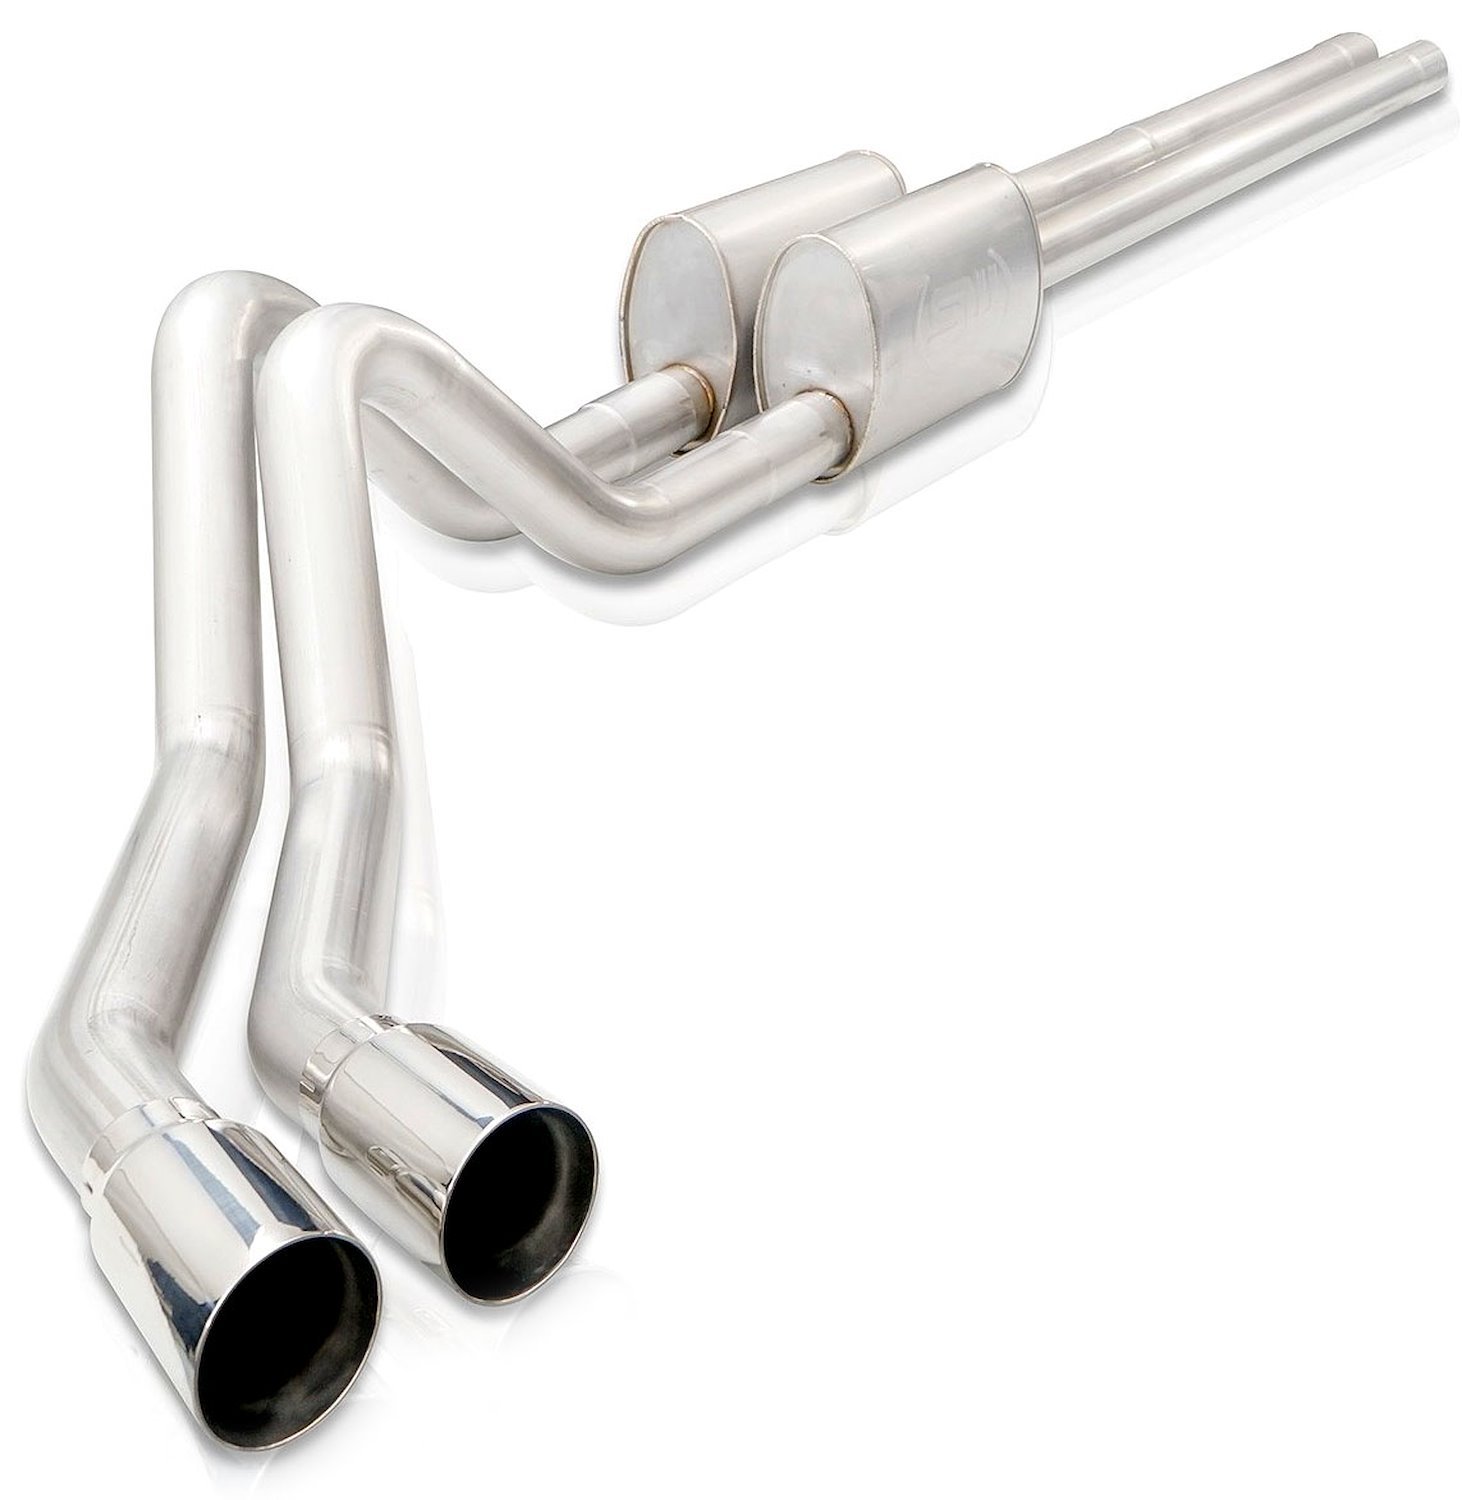 Legend Series Cat-Back Exhaust System 2019 Silverado/Sierra 1500 5.3L, 6.2L - 4 in. Polished Tips - Distinctive Growl/Rumble